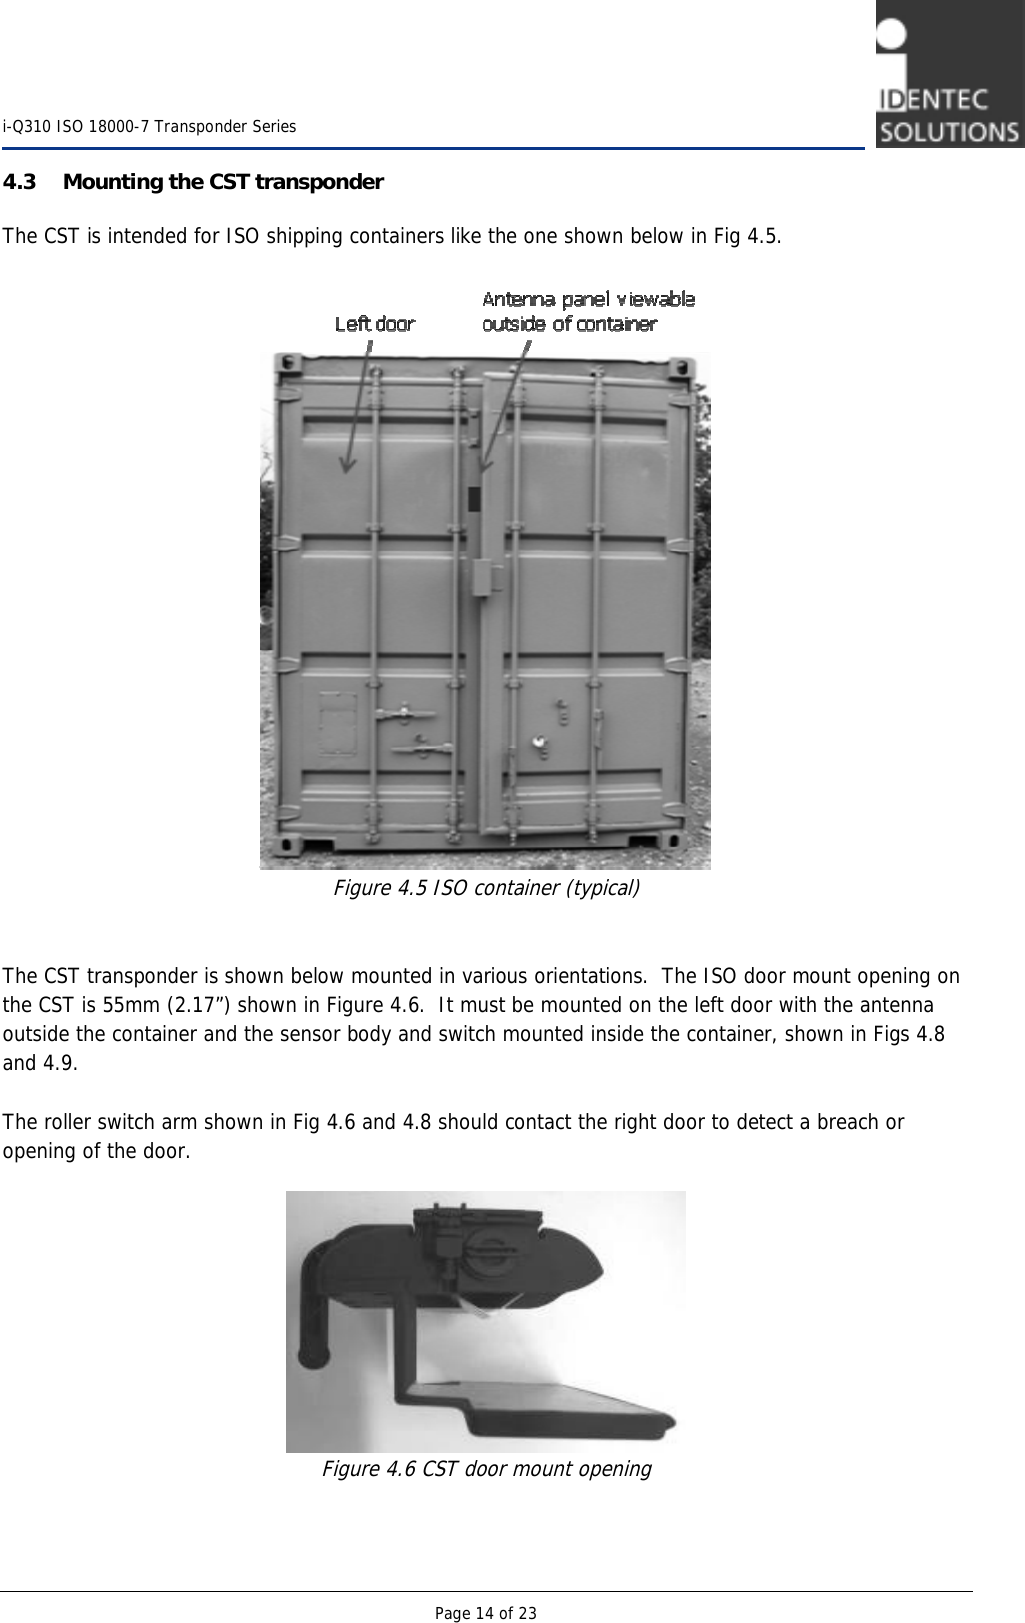    i-Q310 ISO 18000-7 Transponder Series  Page 14 of 23 4.3 Mounting the CST transponder The CST is intended for ISO shipping containers like the one shown below in Fig 4.5.     Figure 4.5 ISO container (typical)   The CST transponder is shown below mounted in various orientations.  The ISO door mount opening on the CST is 55mm (2.17”) shown in Figure 4.6.  It must be mounted on the left door with the antenna outside the container and the sensor body and switch mounted inside the container, shown in Figs 4.8 and 4.9.  The roller switch arm shown in Fig 4.6 and 4.8 should contact the right door to detect a breach or opening of the door.   Figure 4.6 CST door mount opening   